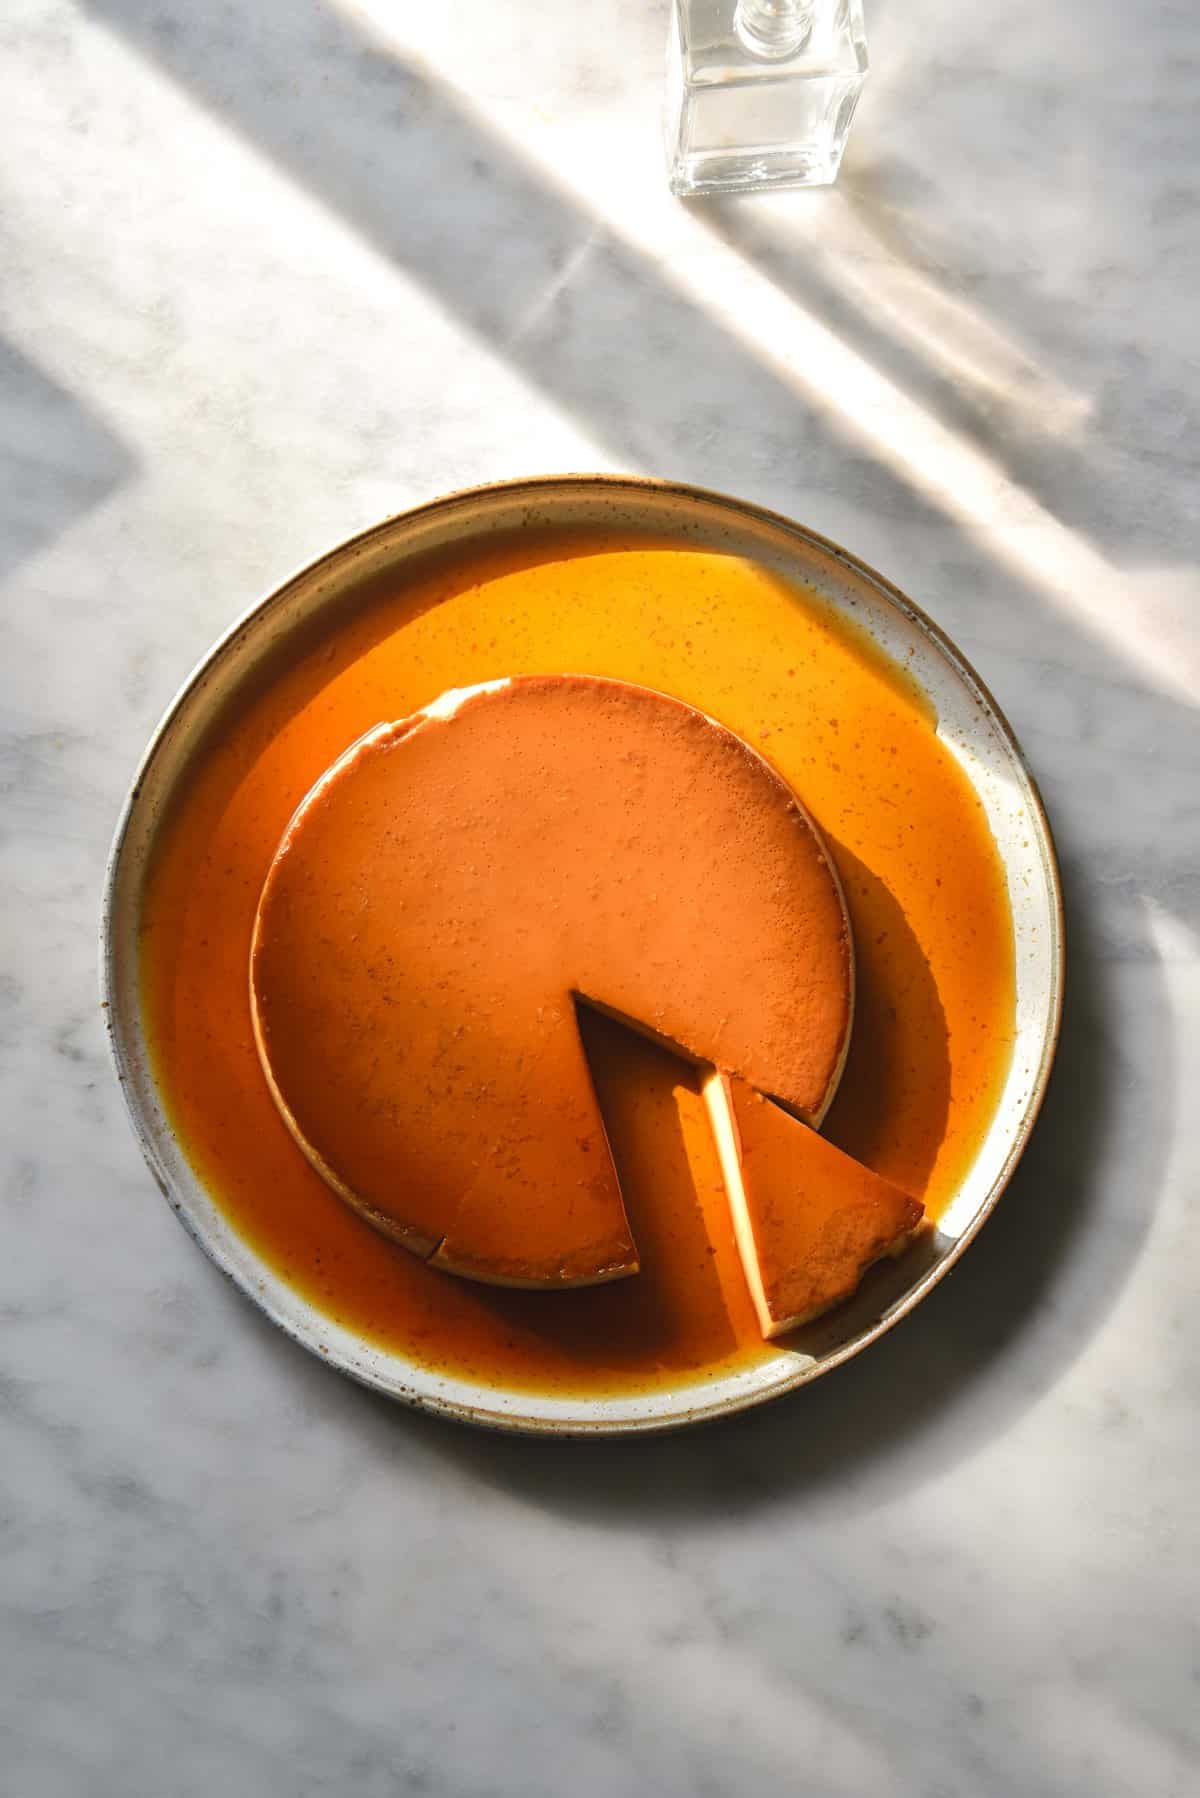 An aerial view of a sunlit white ceramic plate topped with a lactose free creme caramel. Light and shadow patterns from water glasses cast shapes across the top of the image